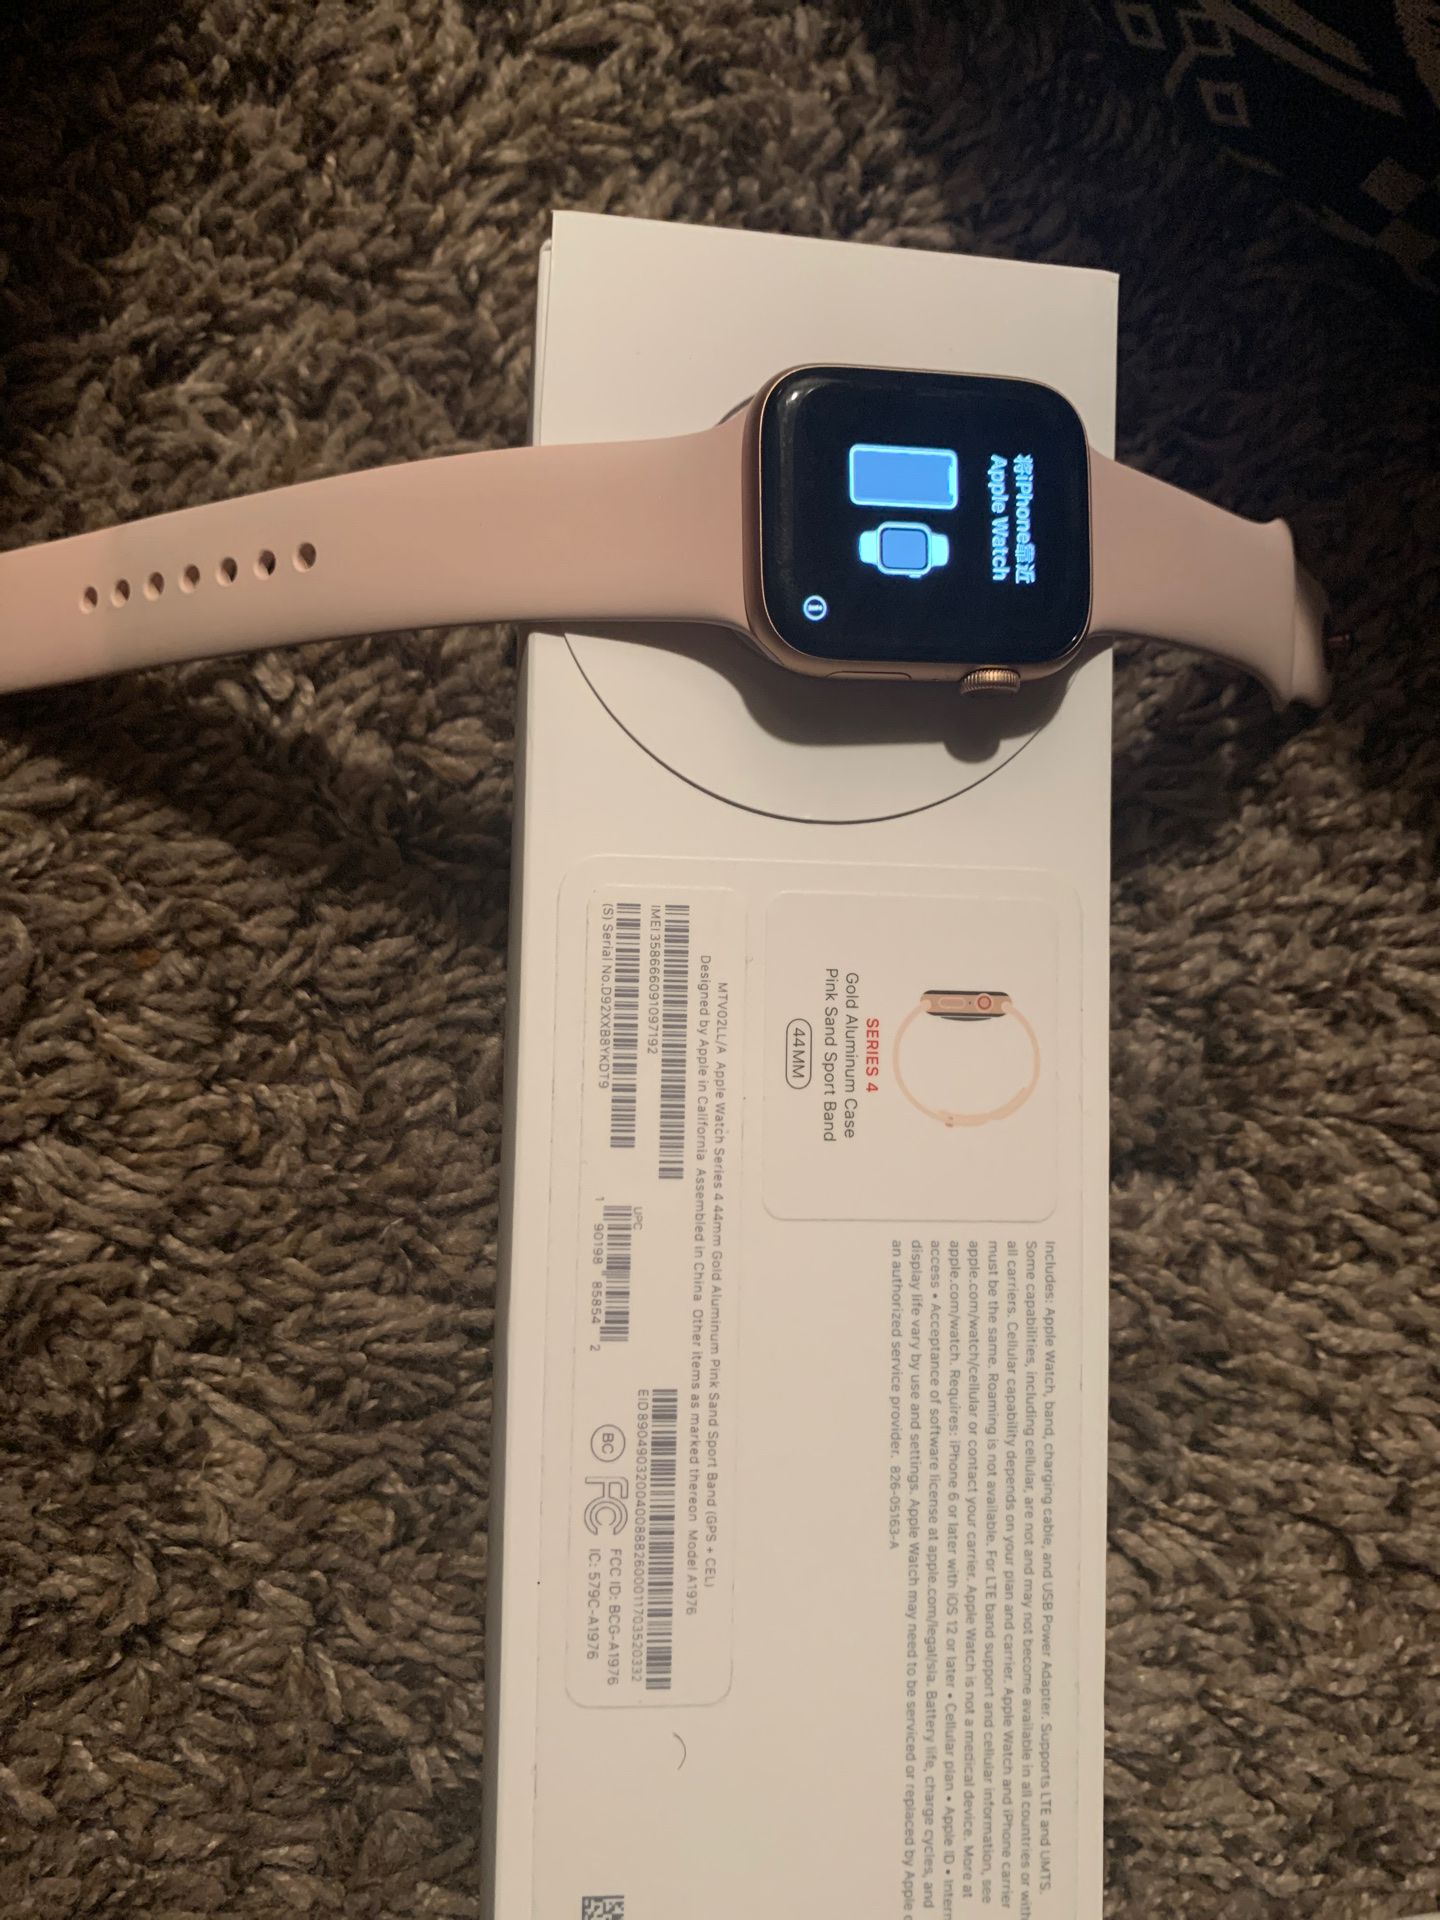 Brand new Apple Watch series 4 + gps and cellular